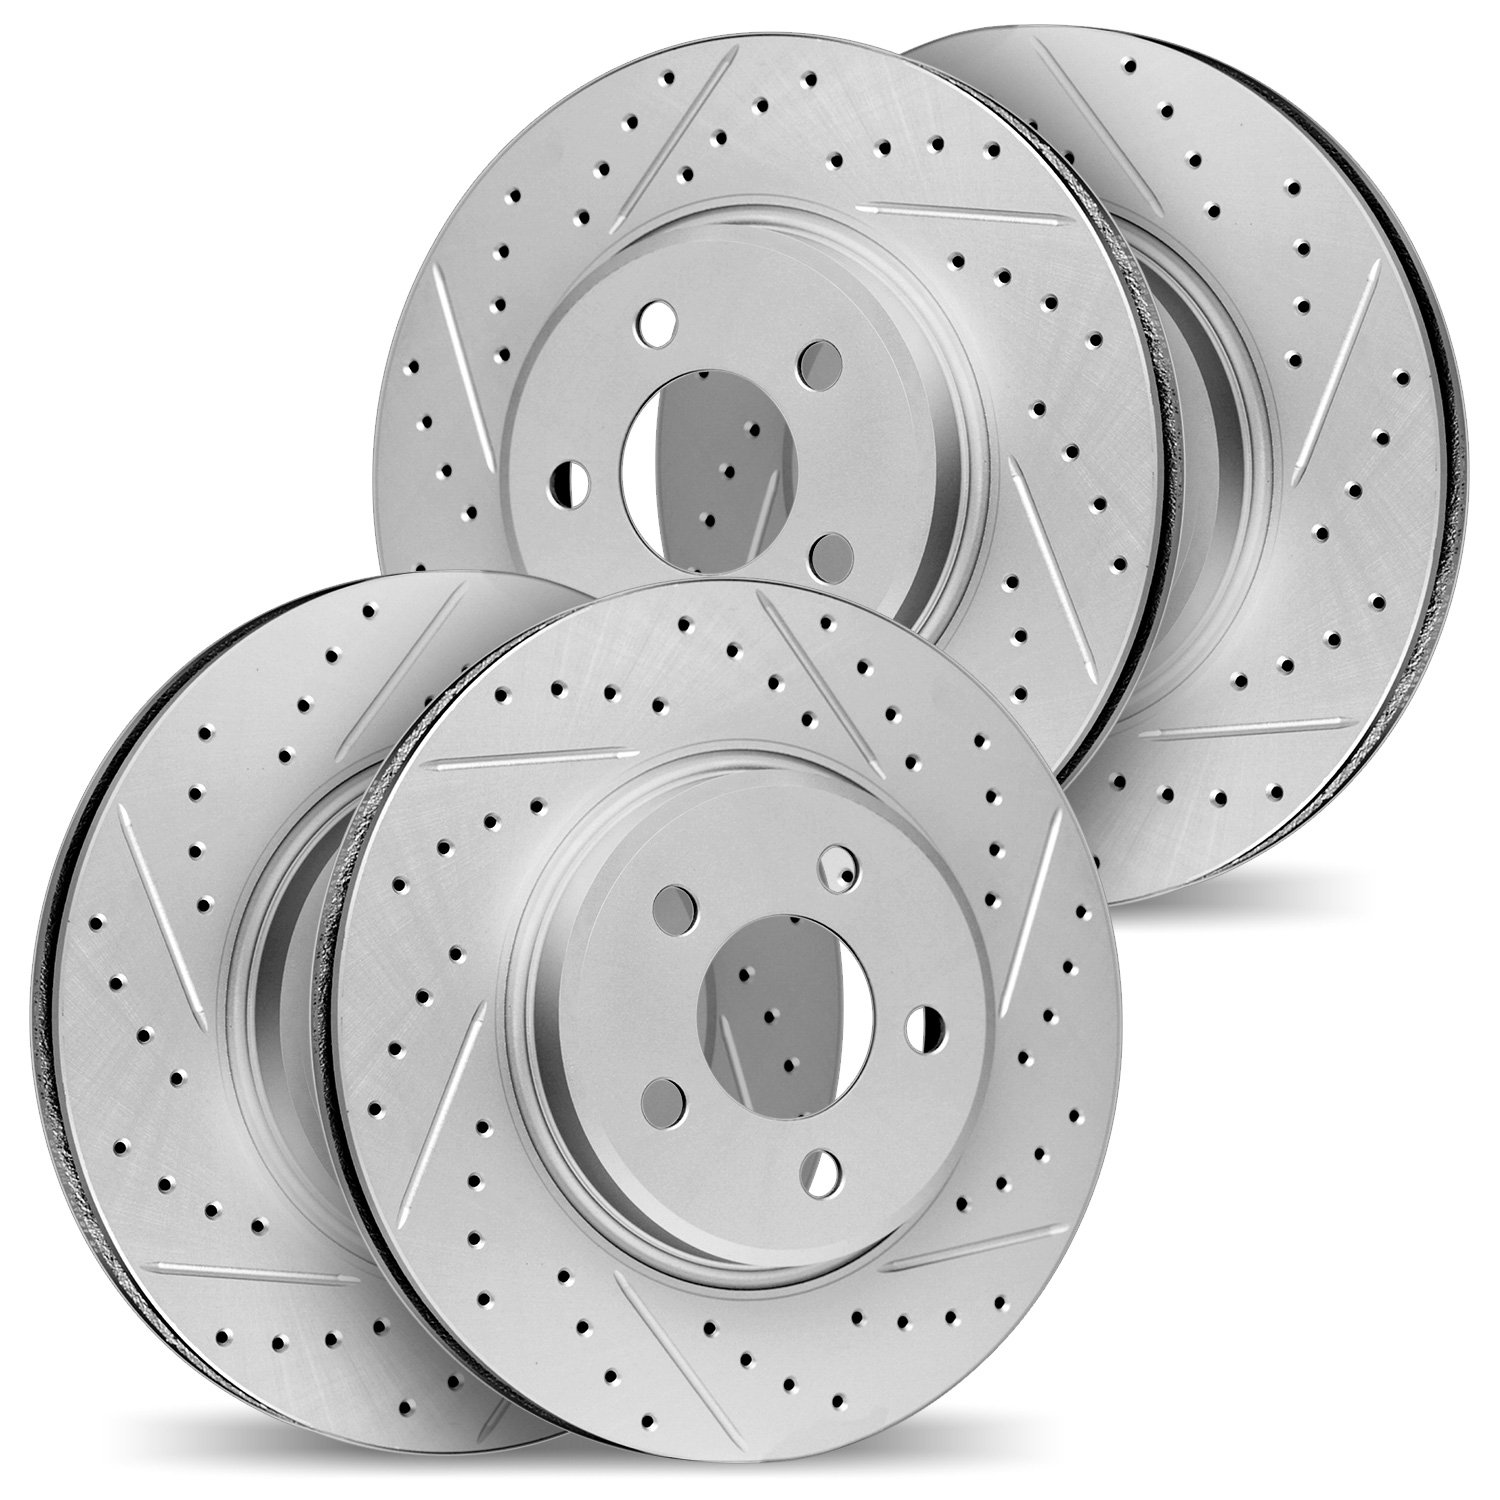 2004-73045 Geoperformance Drilled/Slotted Brake Rotors, 2008-2011 Audi/Volkswagen, Position: Front and Rear